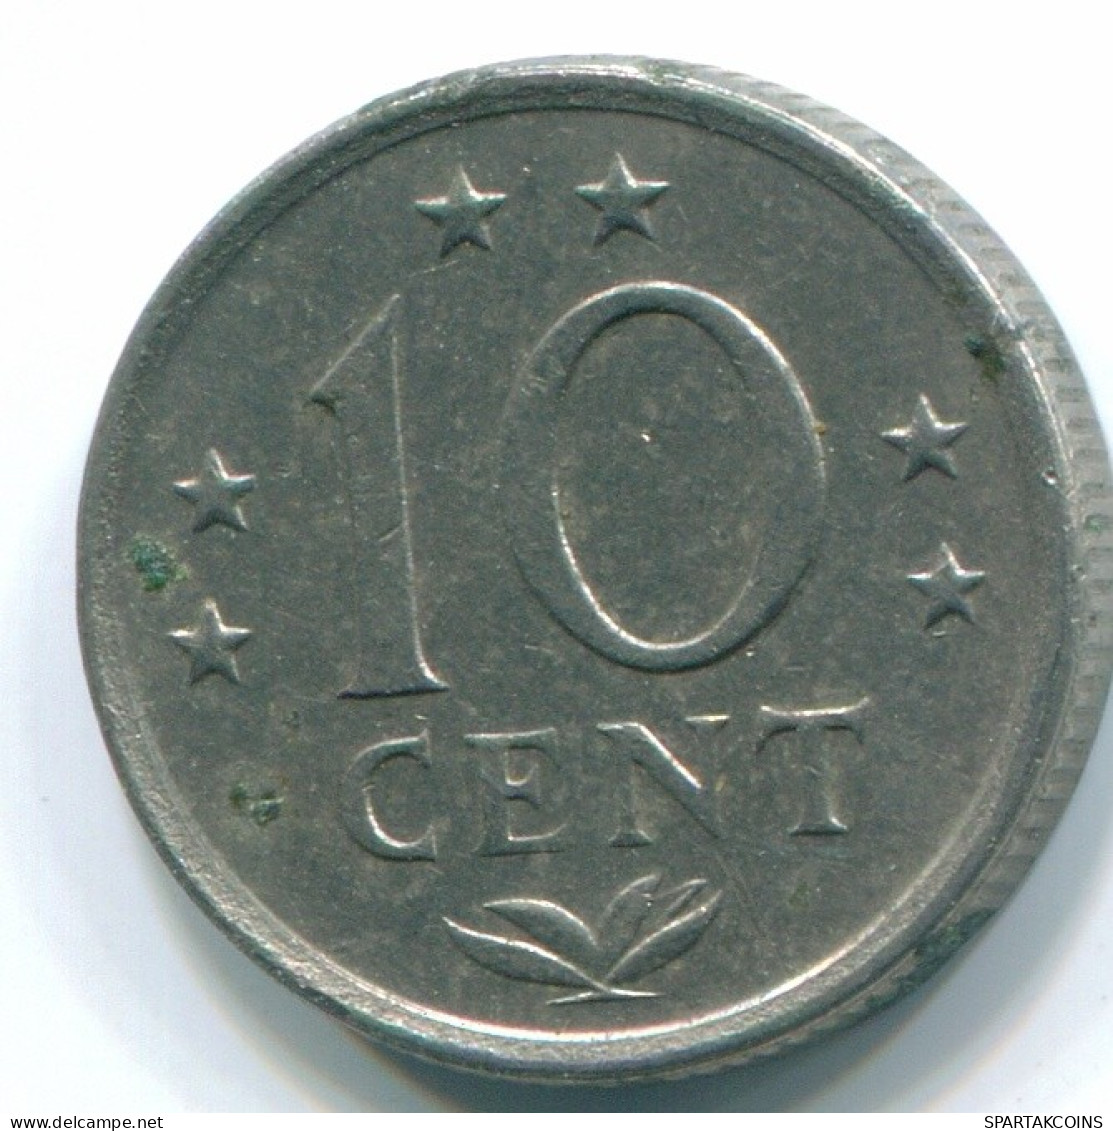 10 CENTS 1970 NETHERLANDS ANTILLES Nickel Colonial Coin #S13363.U.A - Antille Olandesi